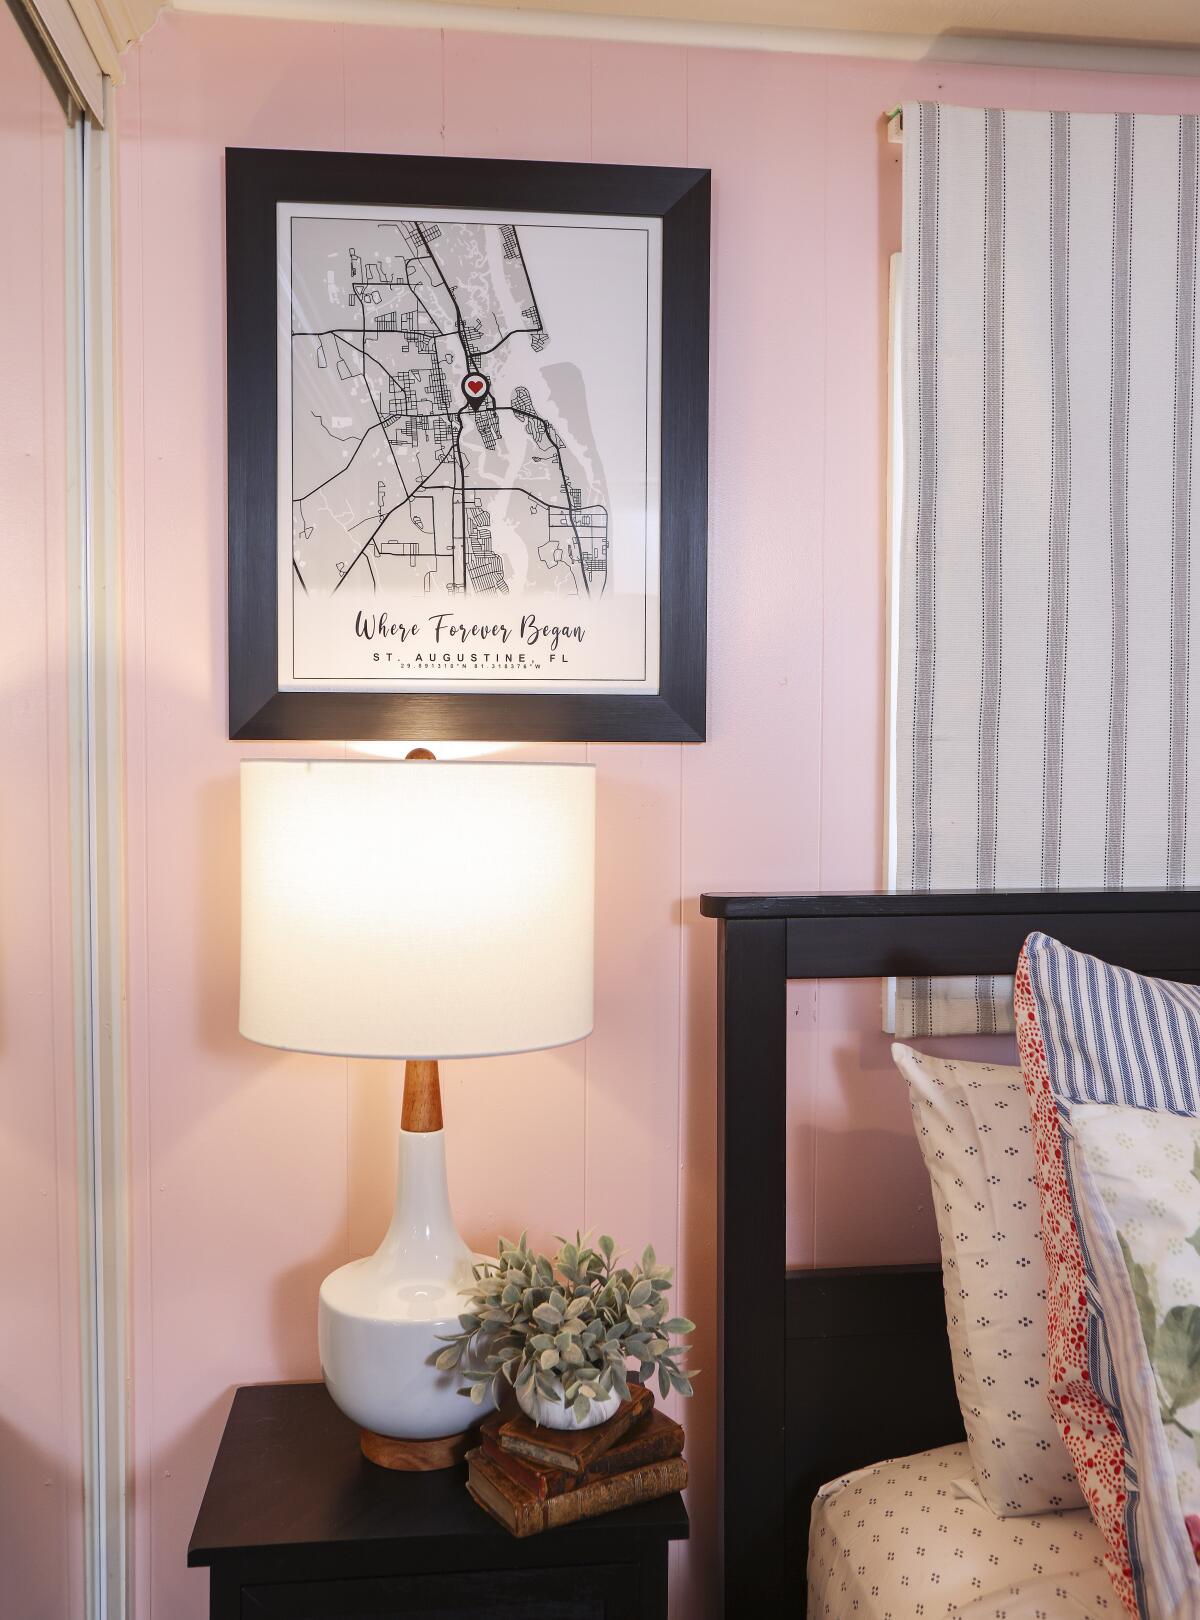 The framed map on the wall in the bedroom pinpoints where the couple met in St. Augustine, Fla.